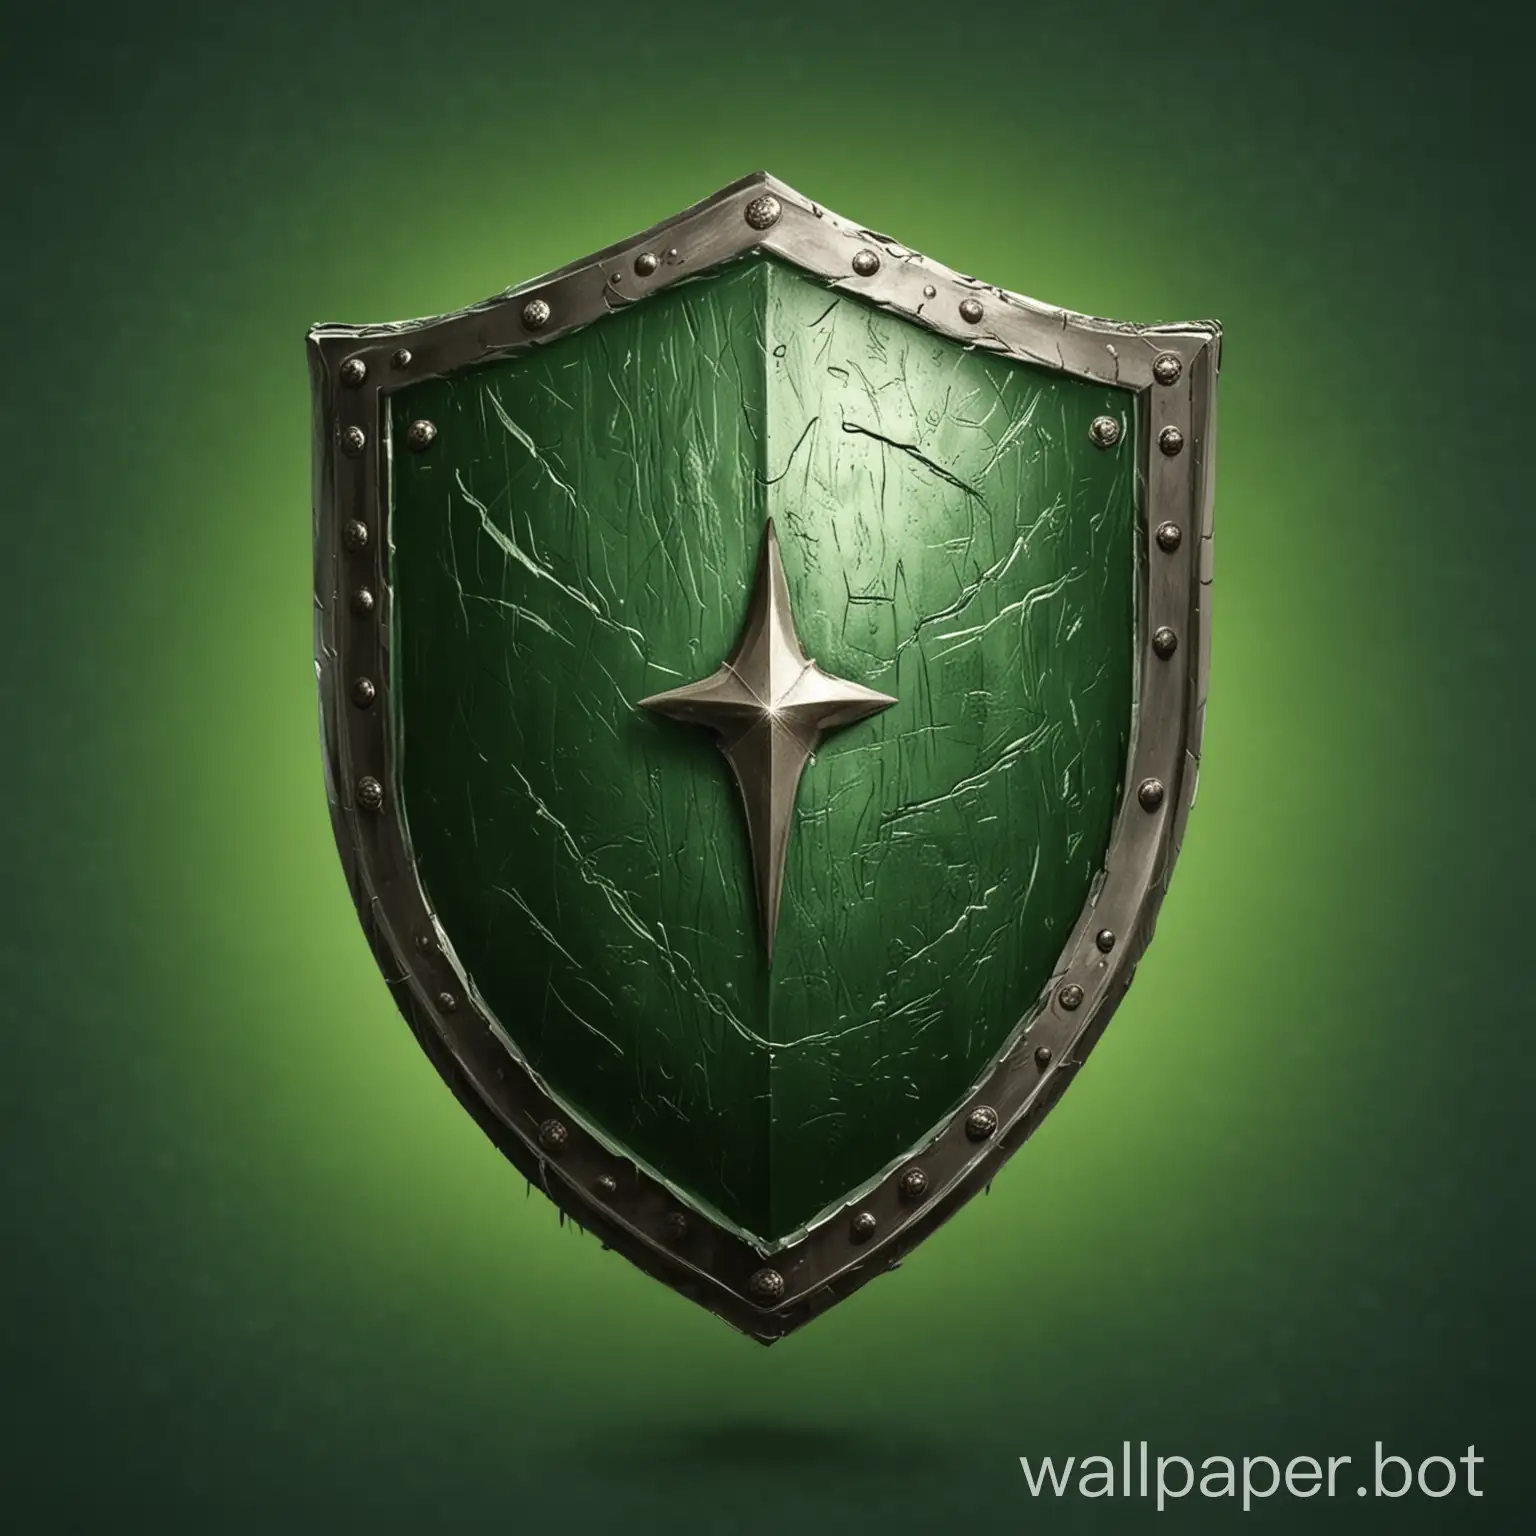 Draw a fantasy shield on a green background